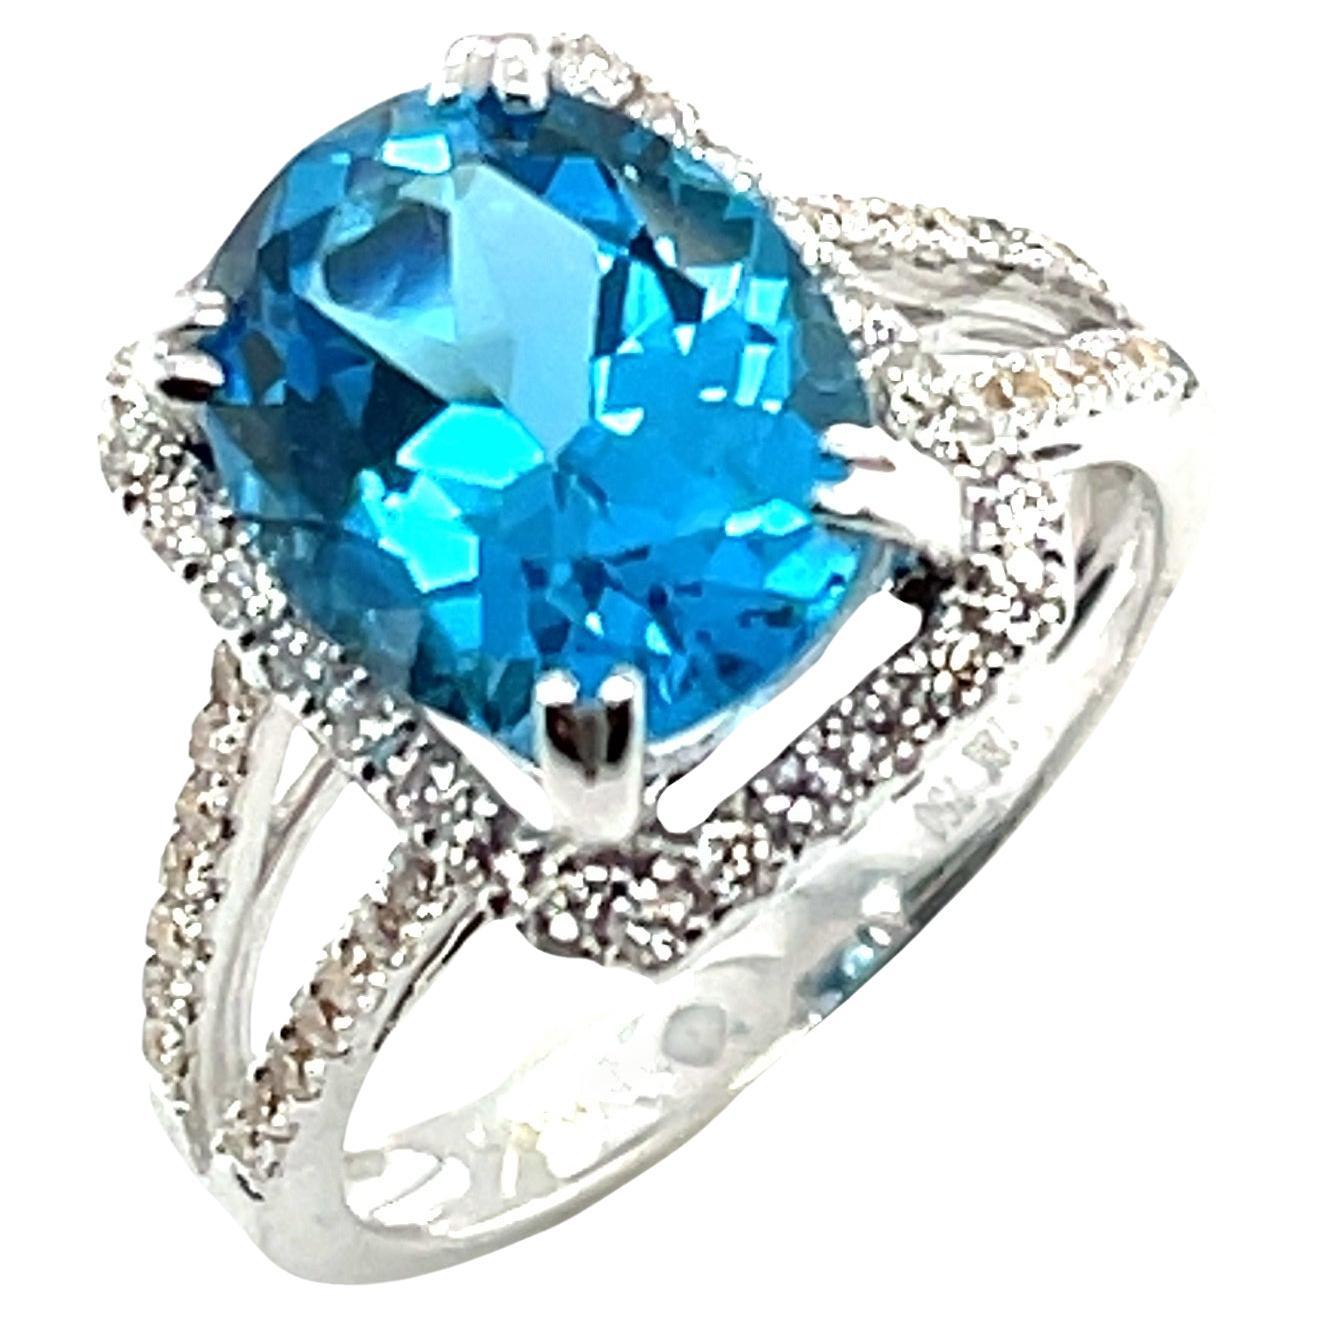 4.38 Carat Blue Topaz and Diamond Halo Cocktail Ring in 18k White Gold  For Sale